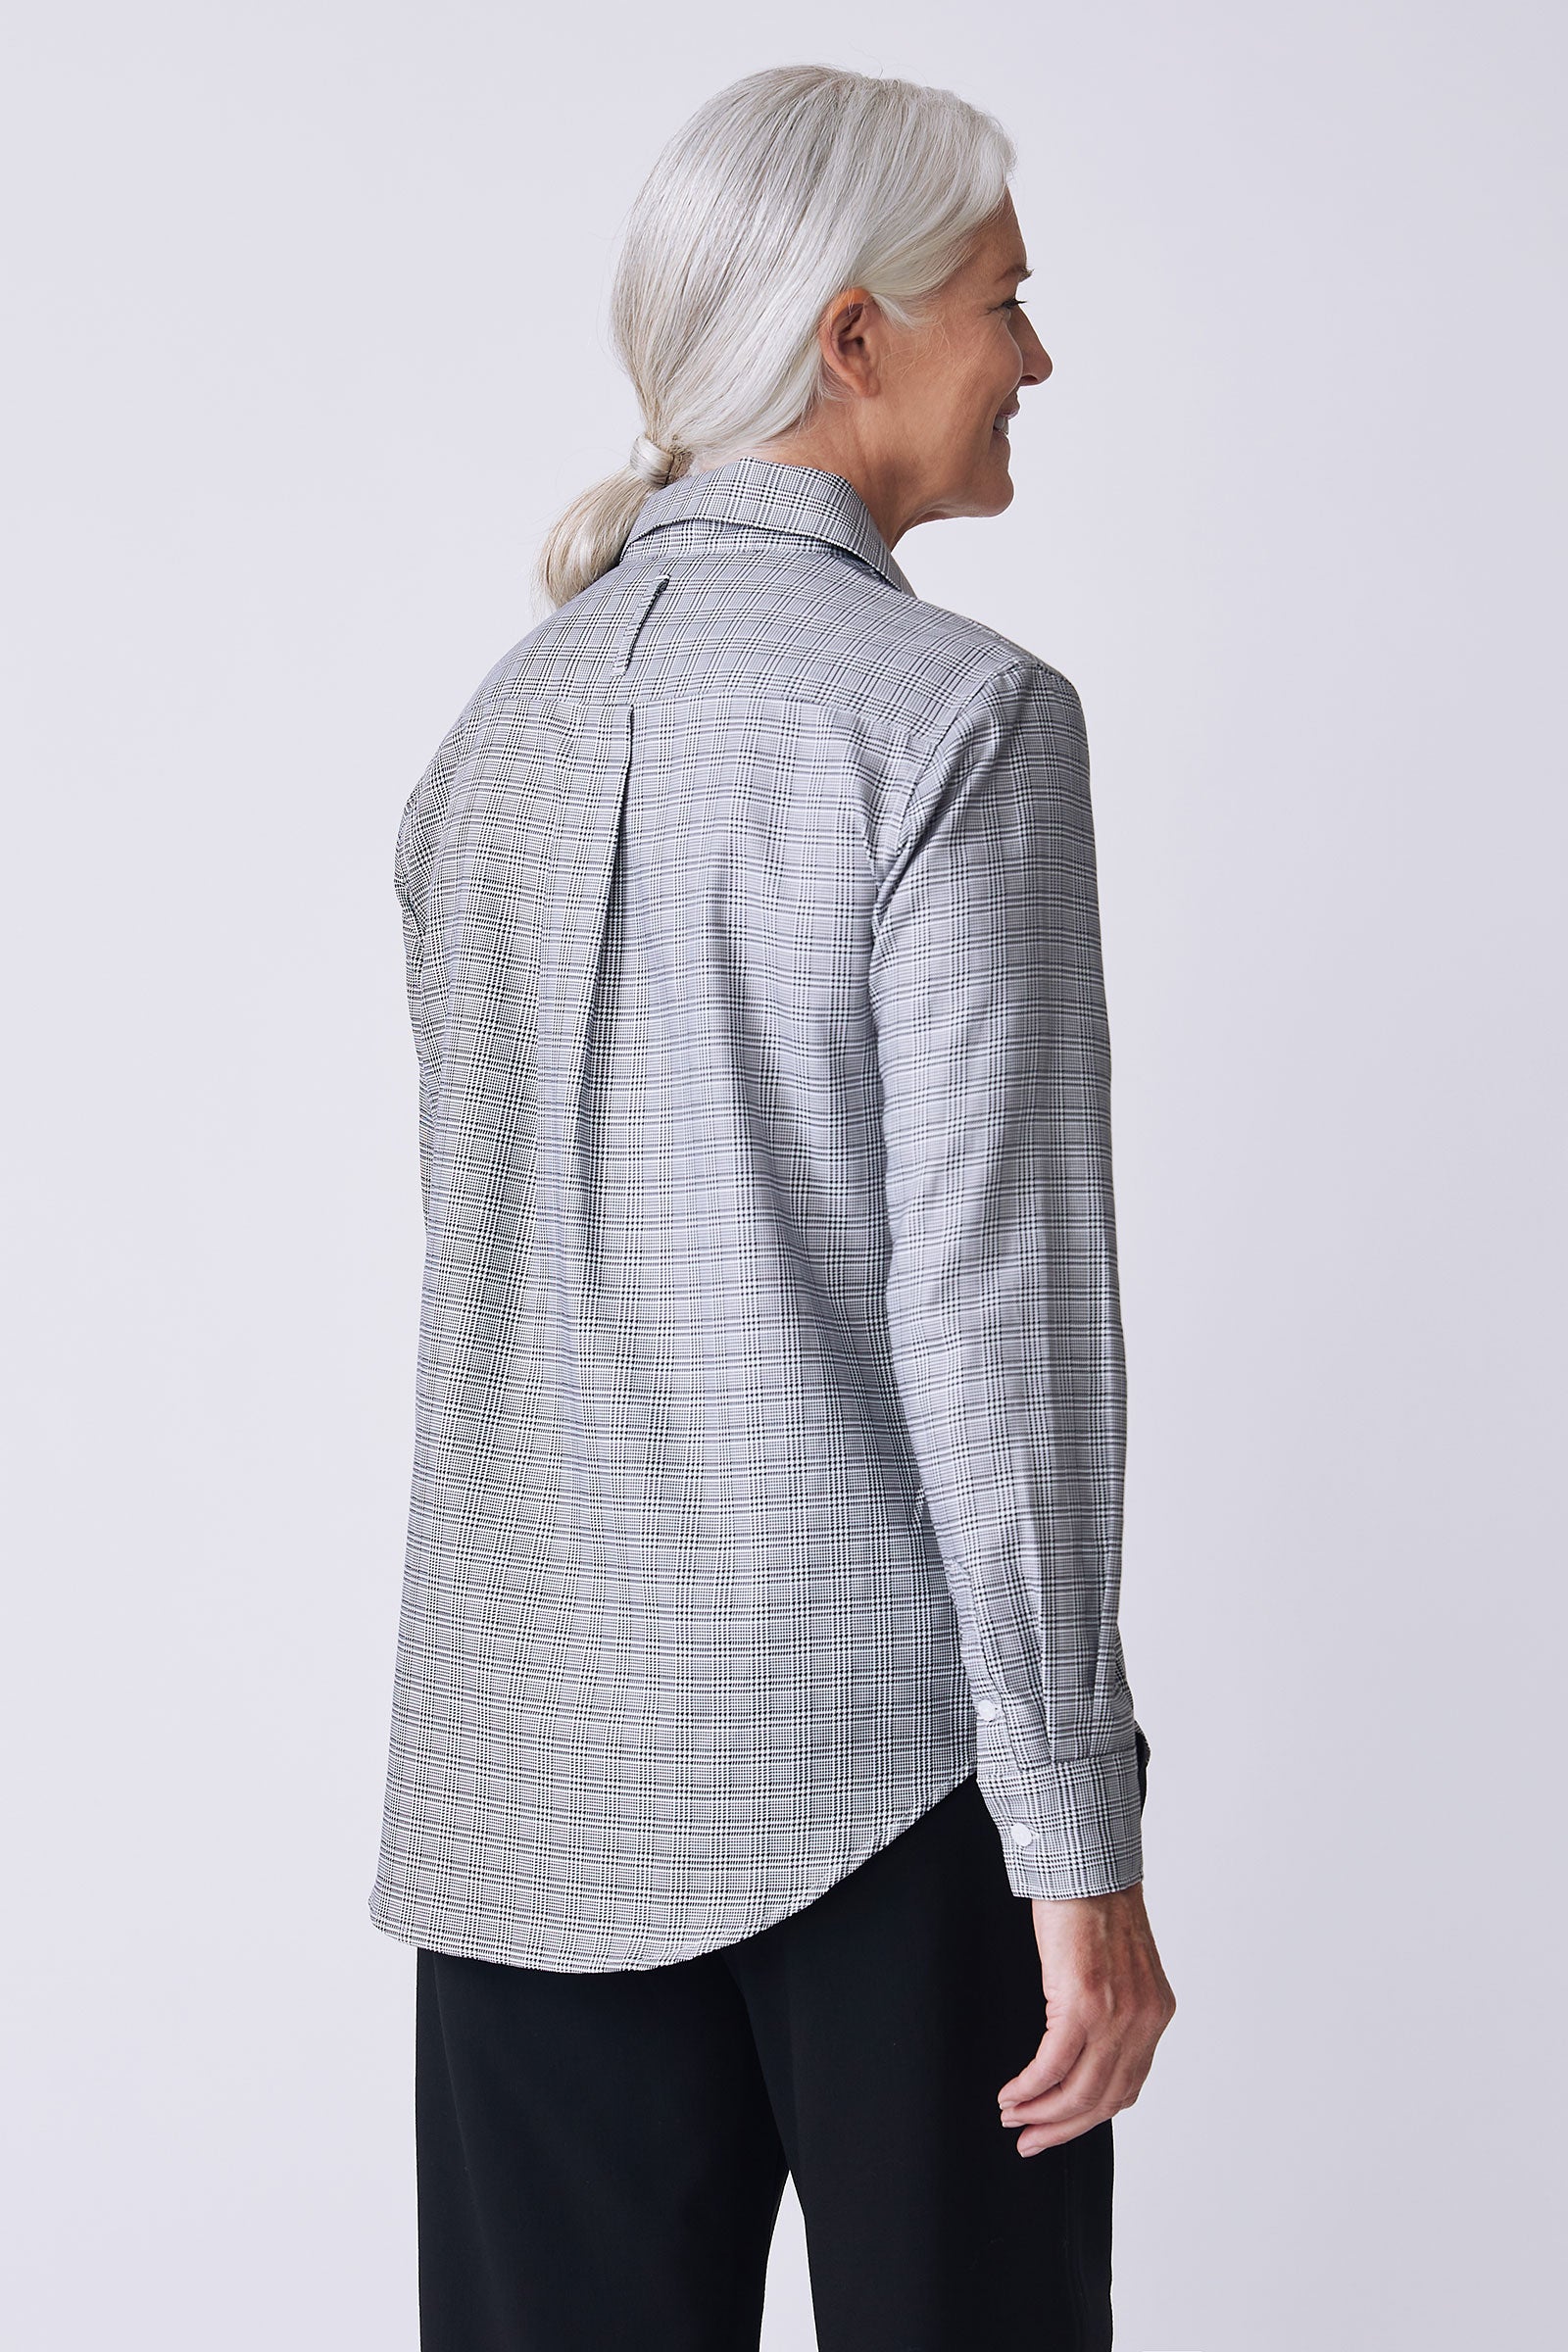 Kal Rieman Ginna Box Pleat Tailored Shirt in glen plaid black and white on model front view detail